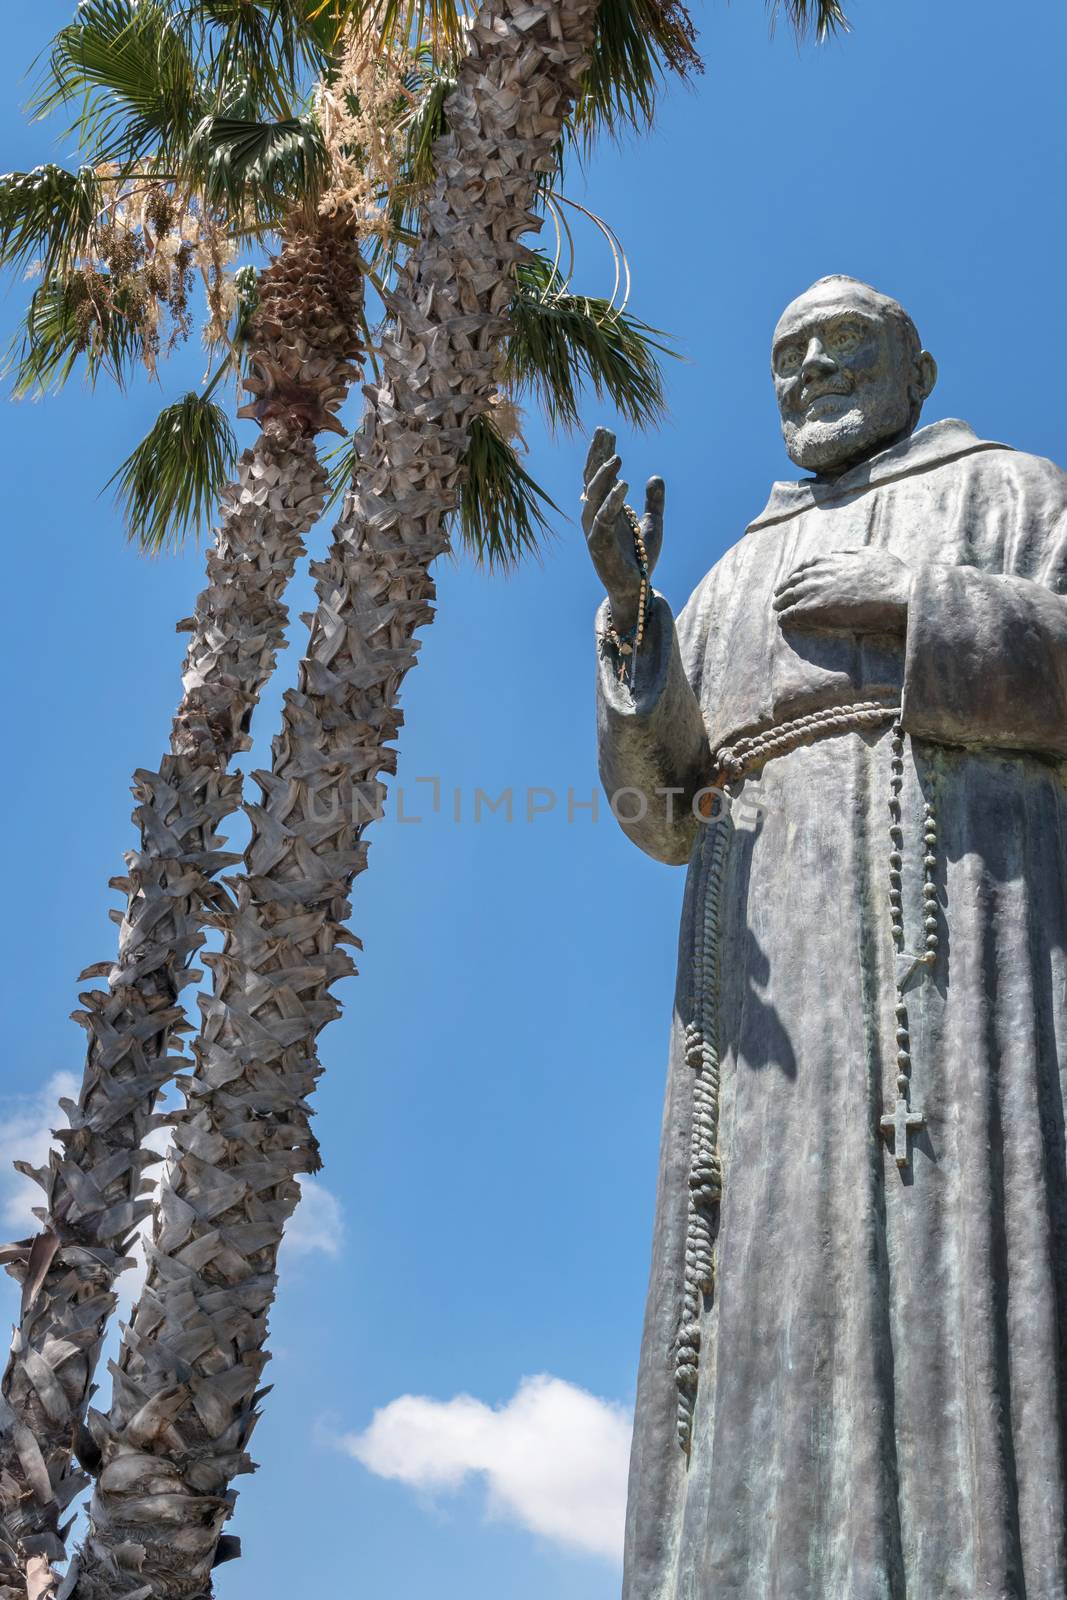 Statue of Saint Father Pio on sky background. Ideal for concepts or events.